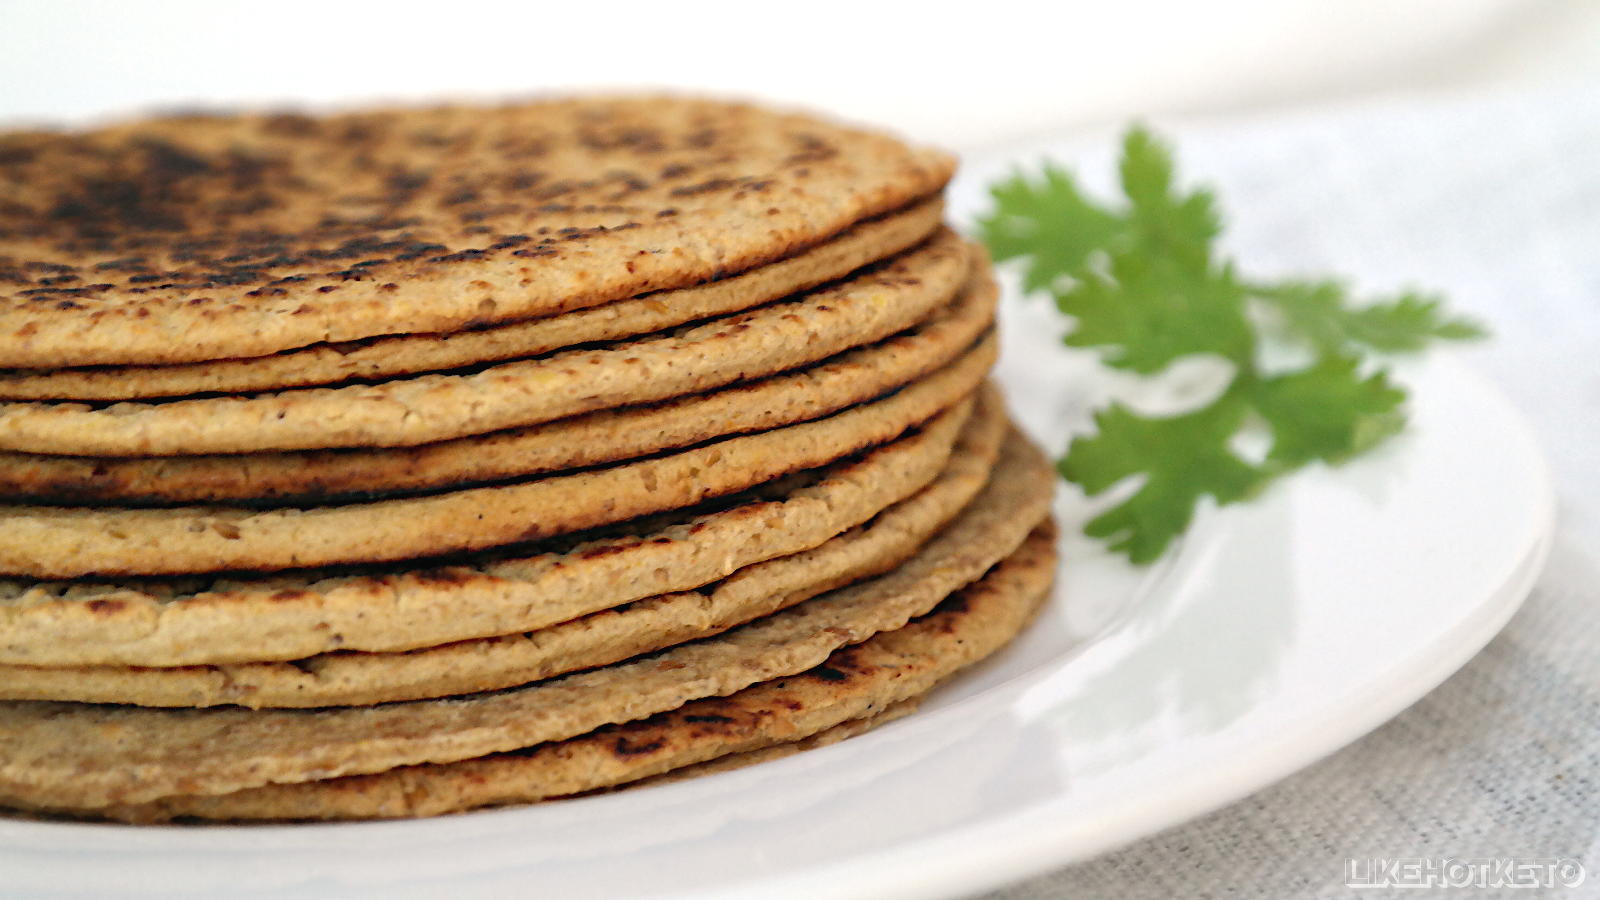 Flax meal tortillas piled up on a plate.